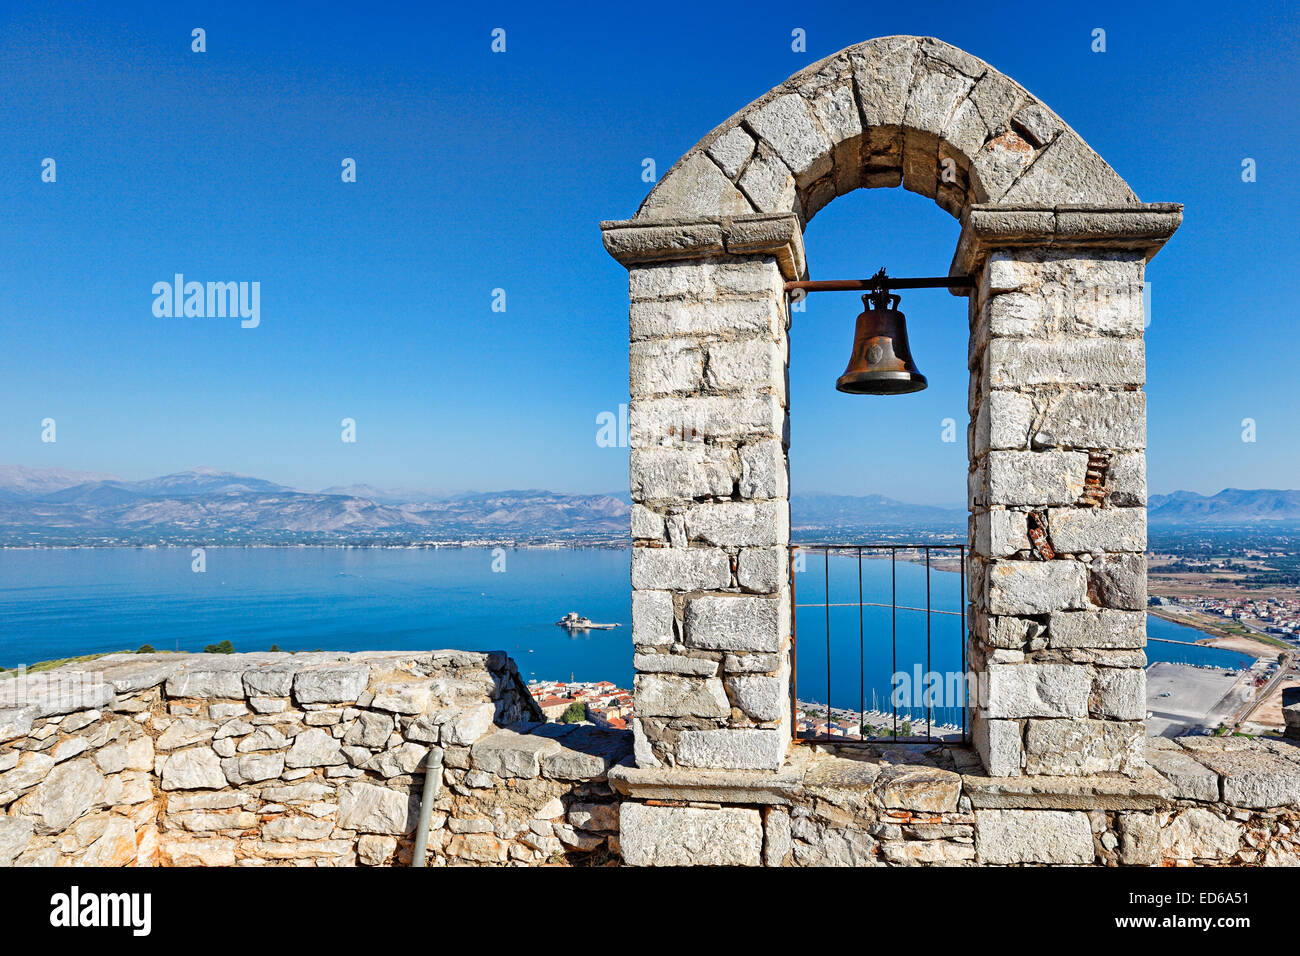 The bay of Nafplio from the castle Palamidi, Greece Stock Photo